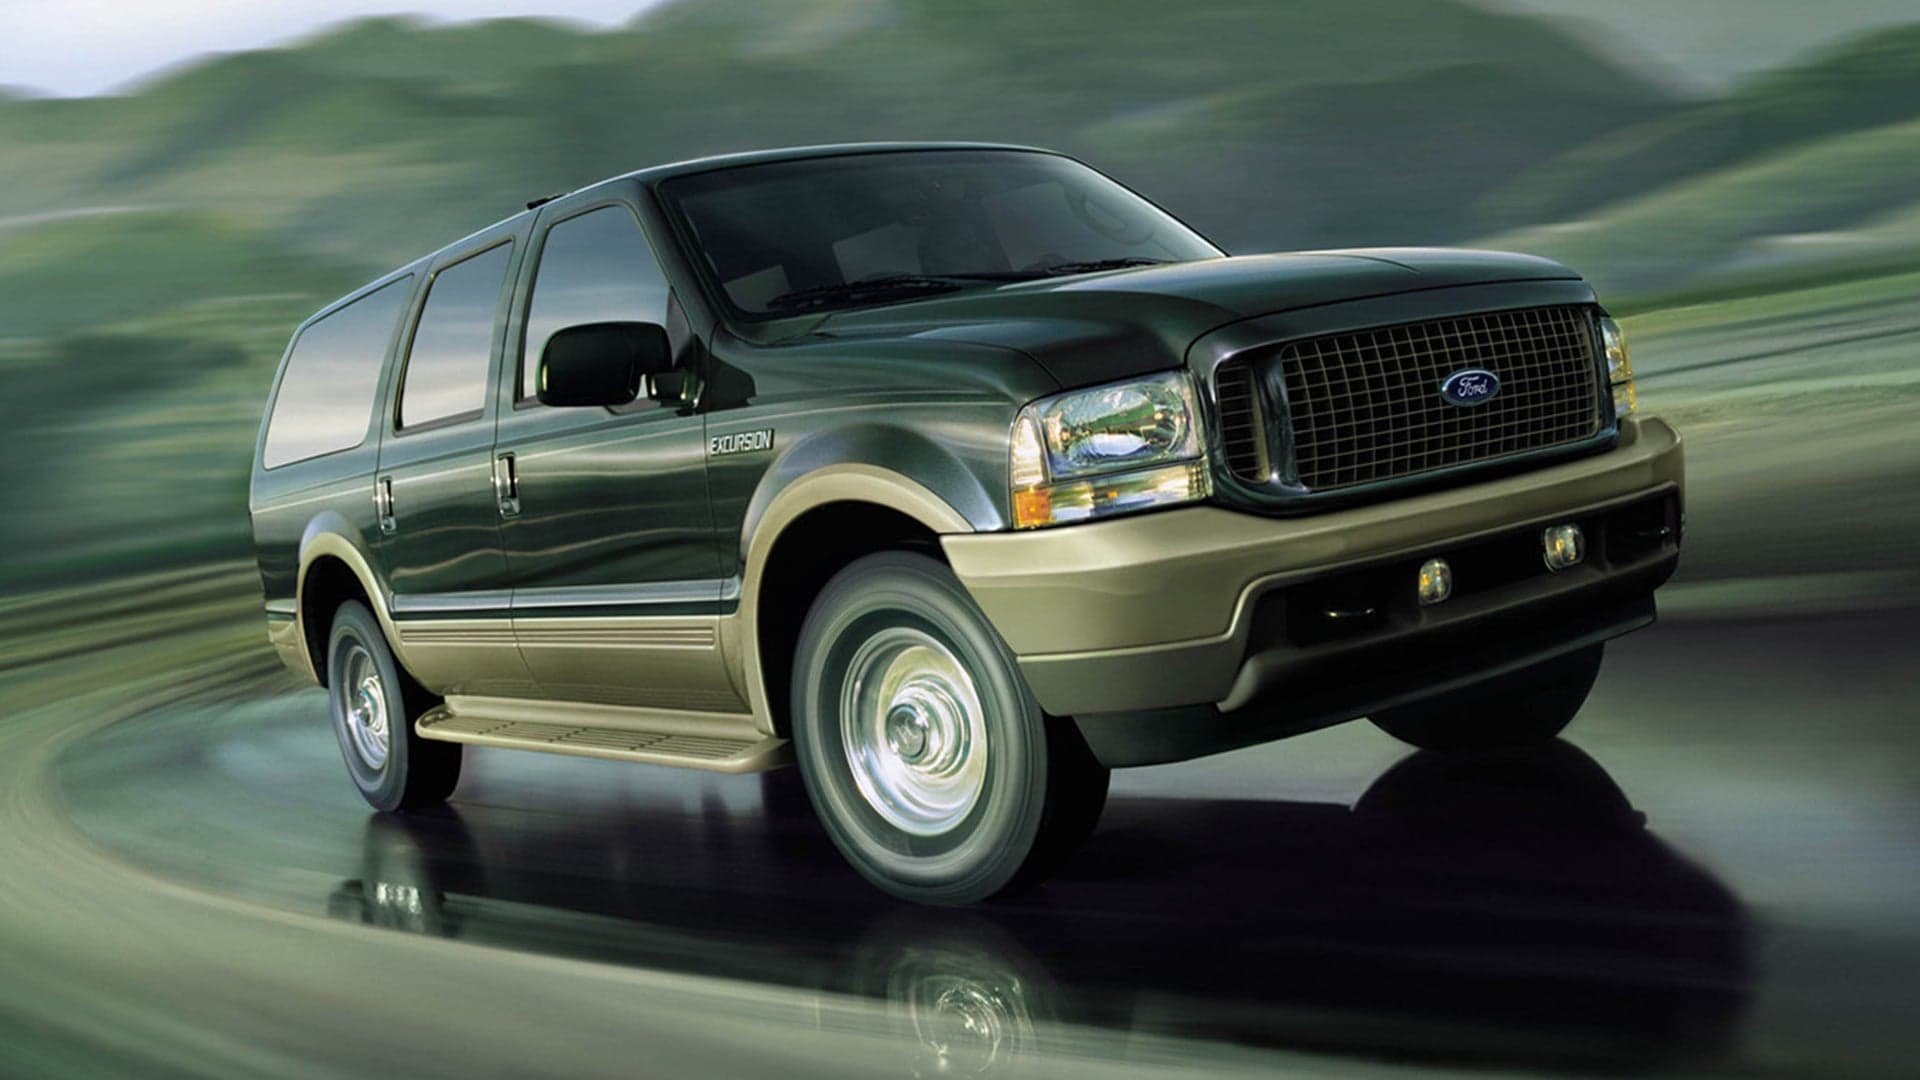 There’s a Secret Fleet of New Ford Excursions Hiding in a Dubai Warehouse